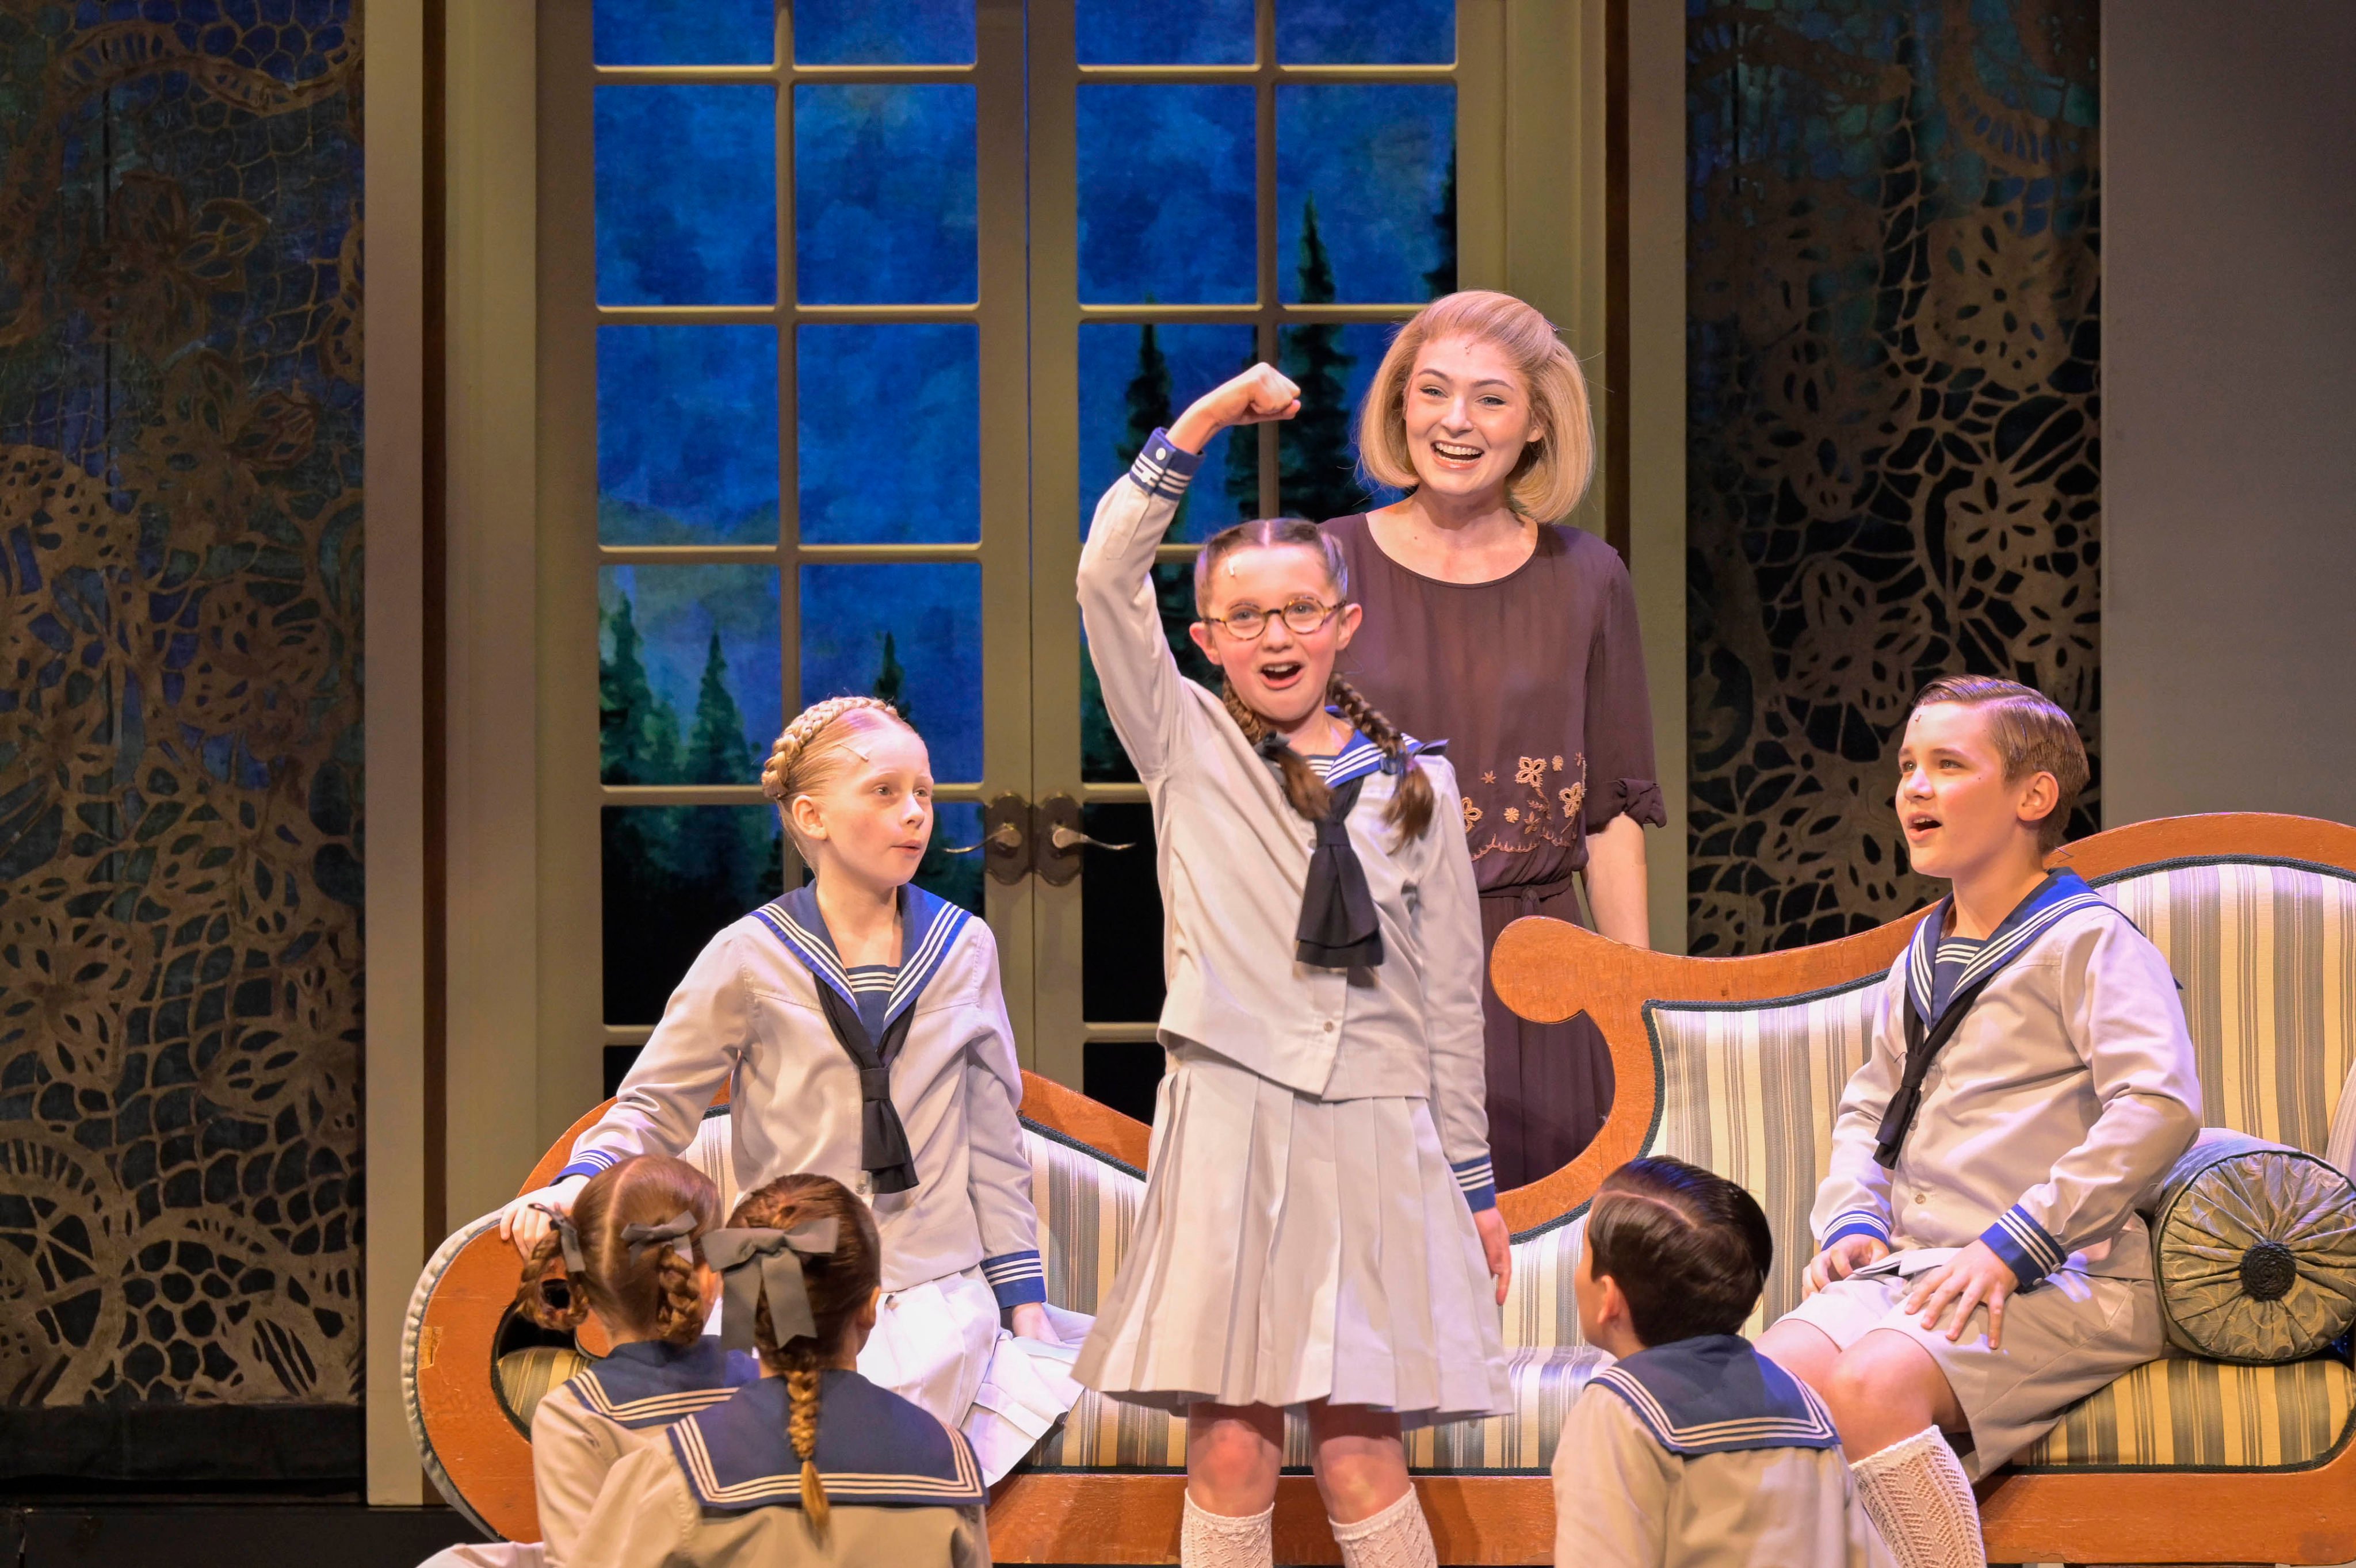 Maria and the Von Trapp children sing “Do-Re-Mi” in a scene from The Sound of Music, co-presented in Hong Kong by the China Arts and Entertainment Group, a Chinese state-owned company. Photo: The Sound of Music